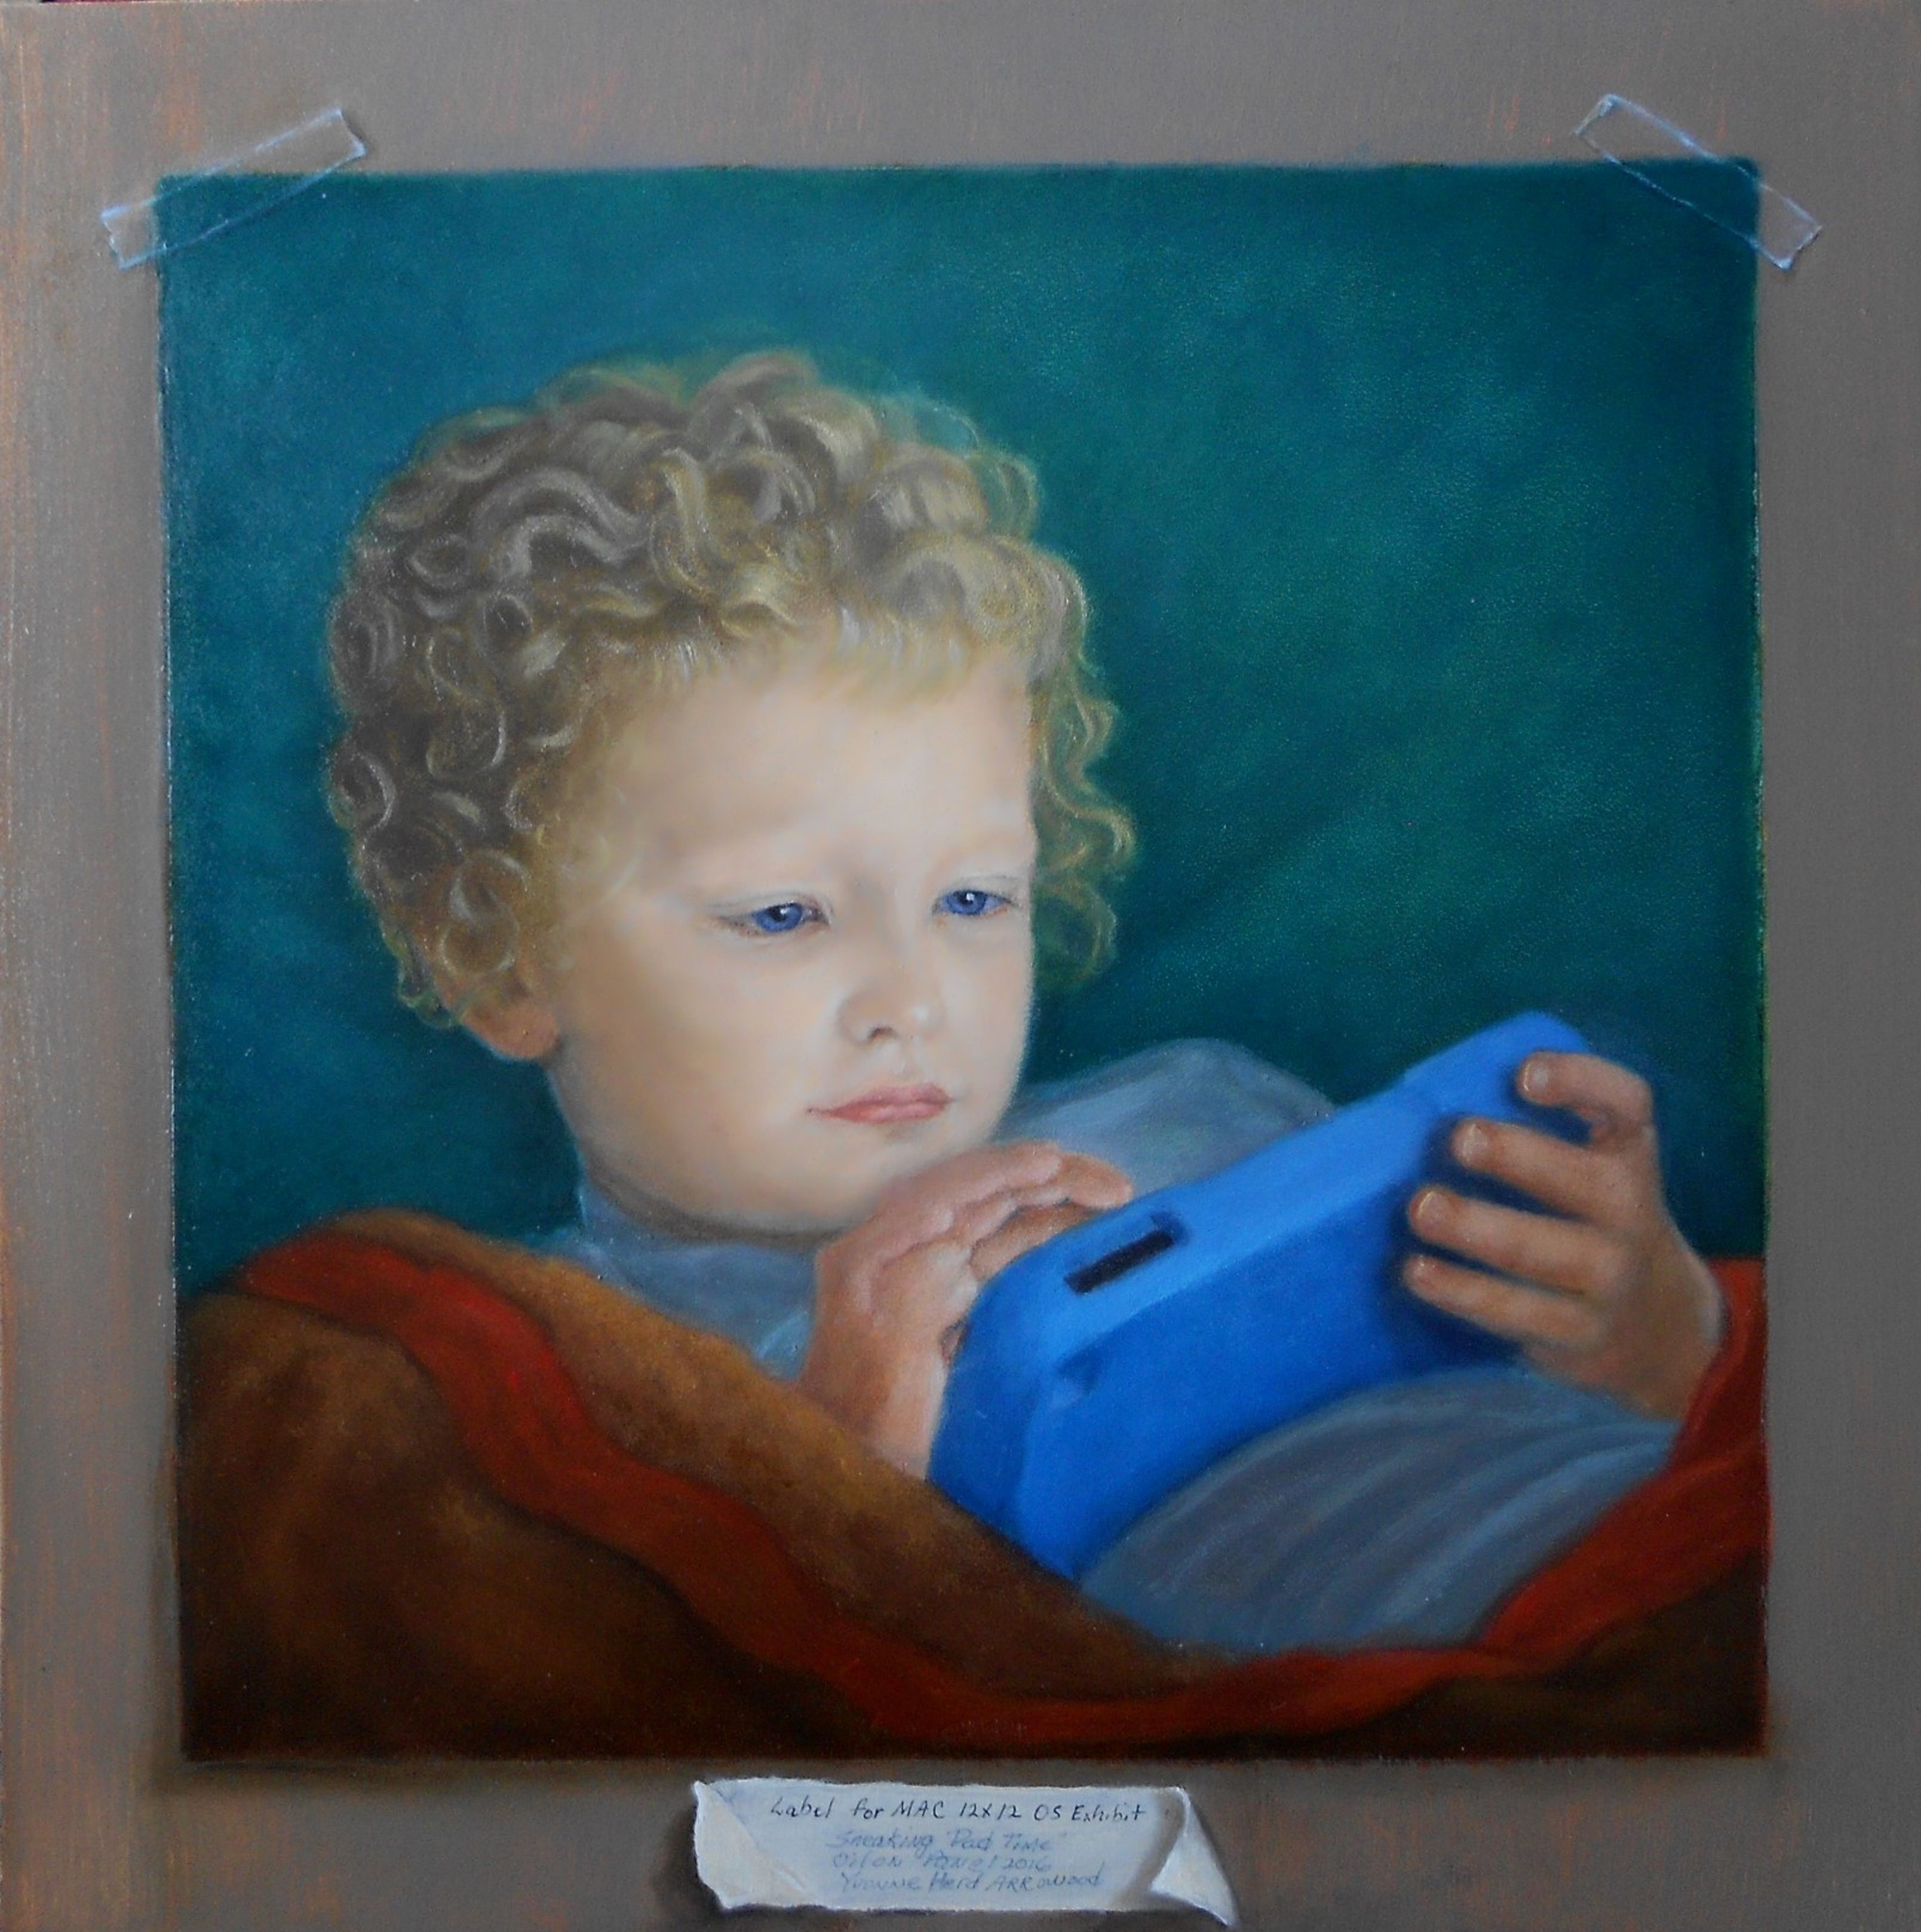 Henry Stealing Pad Time by Yvonne Herd Arrowood